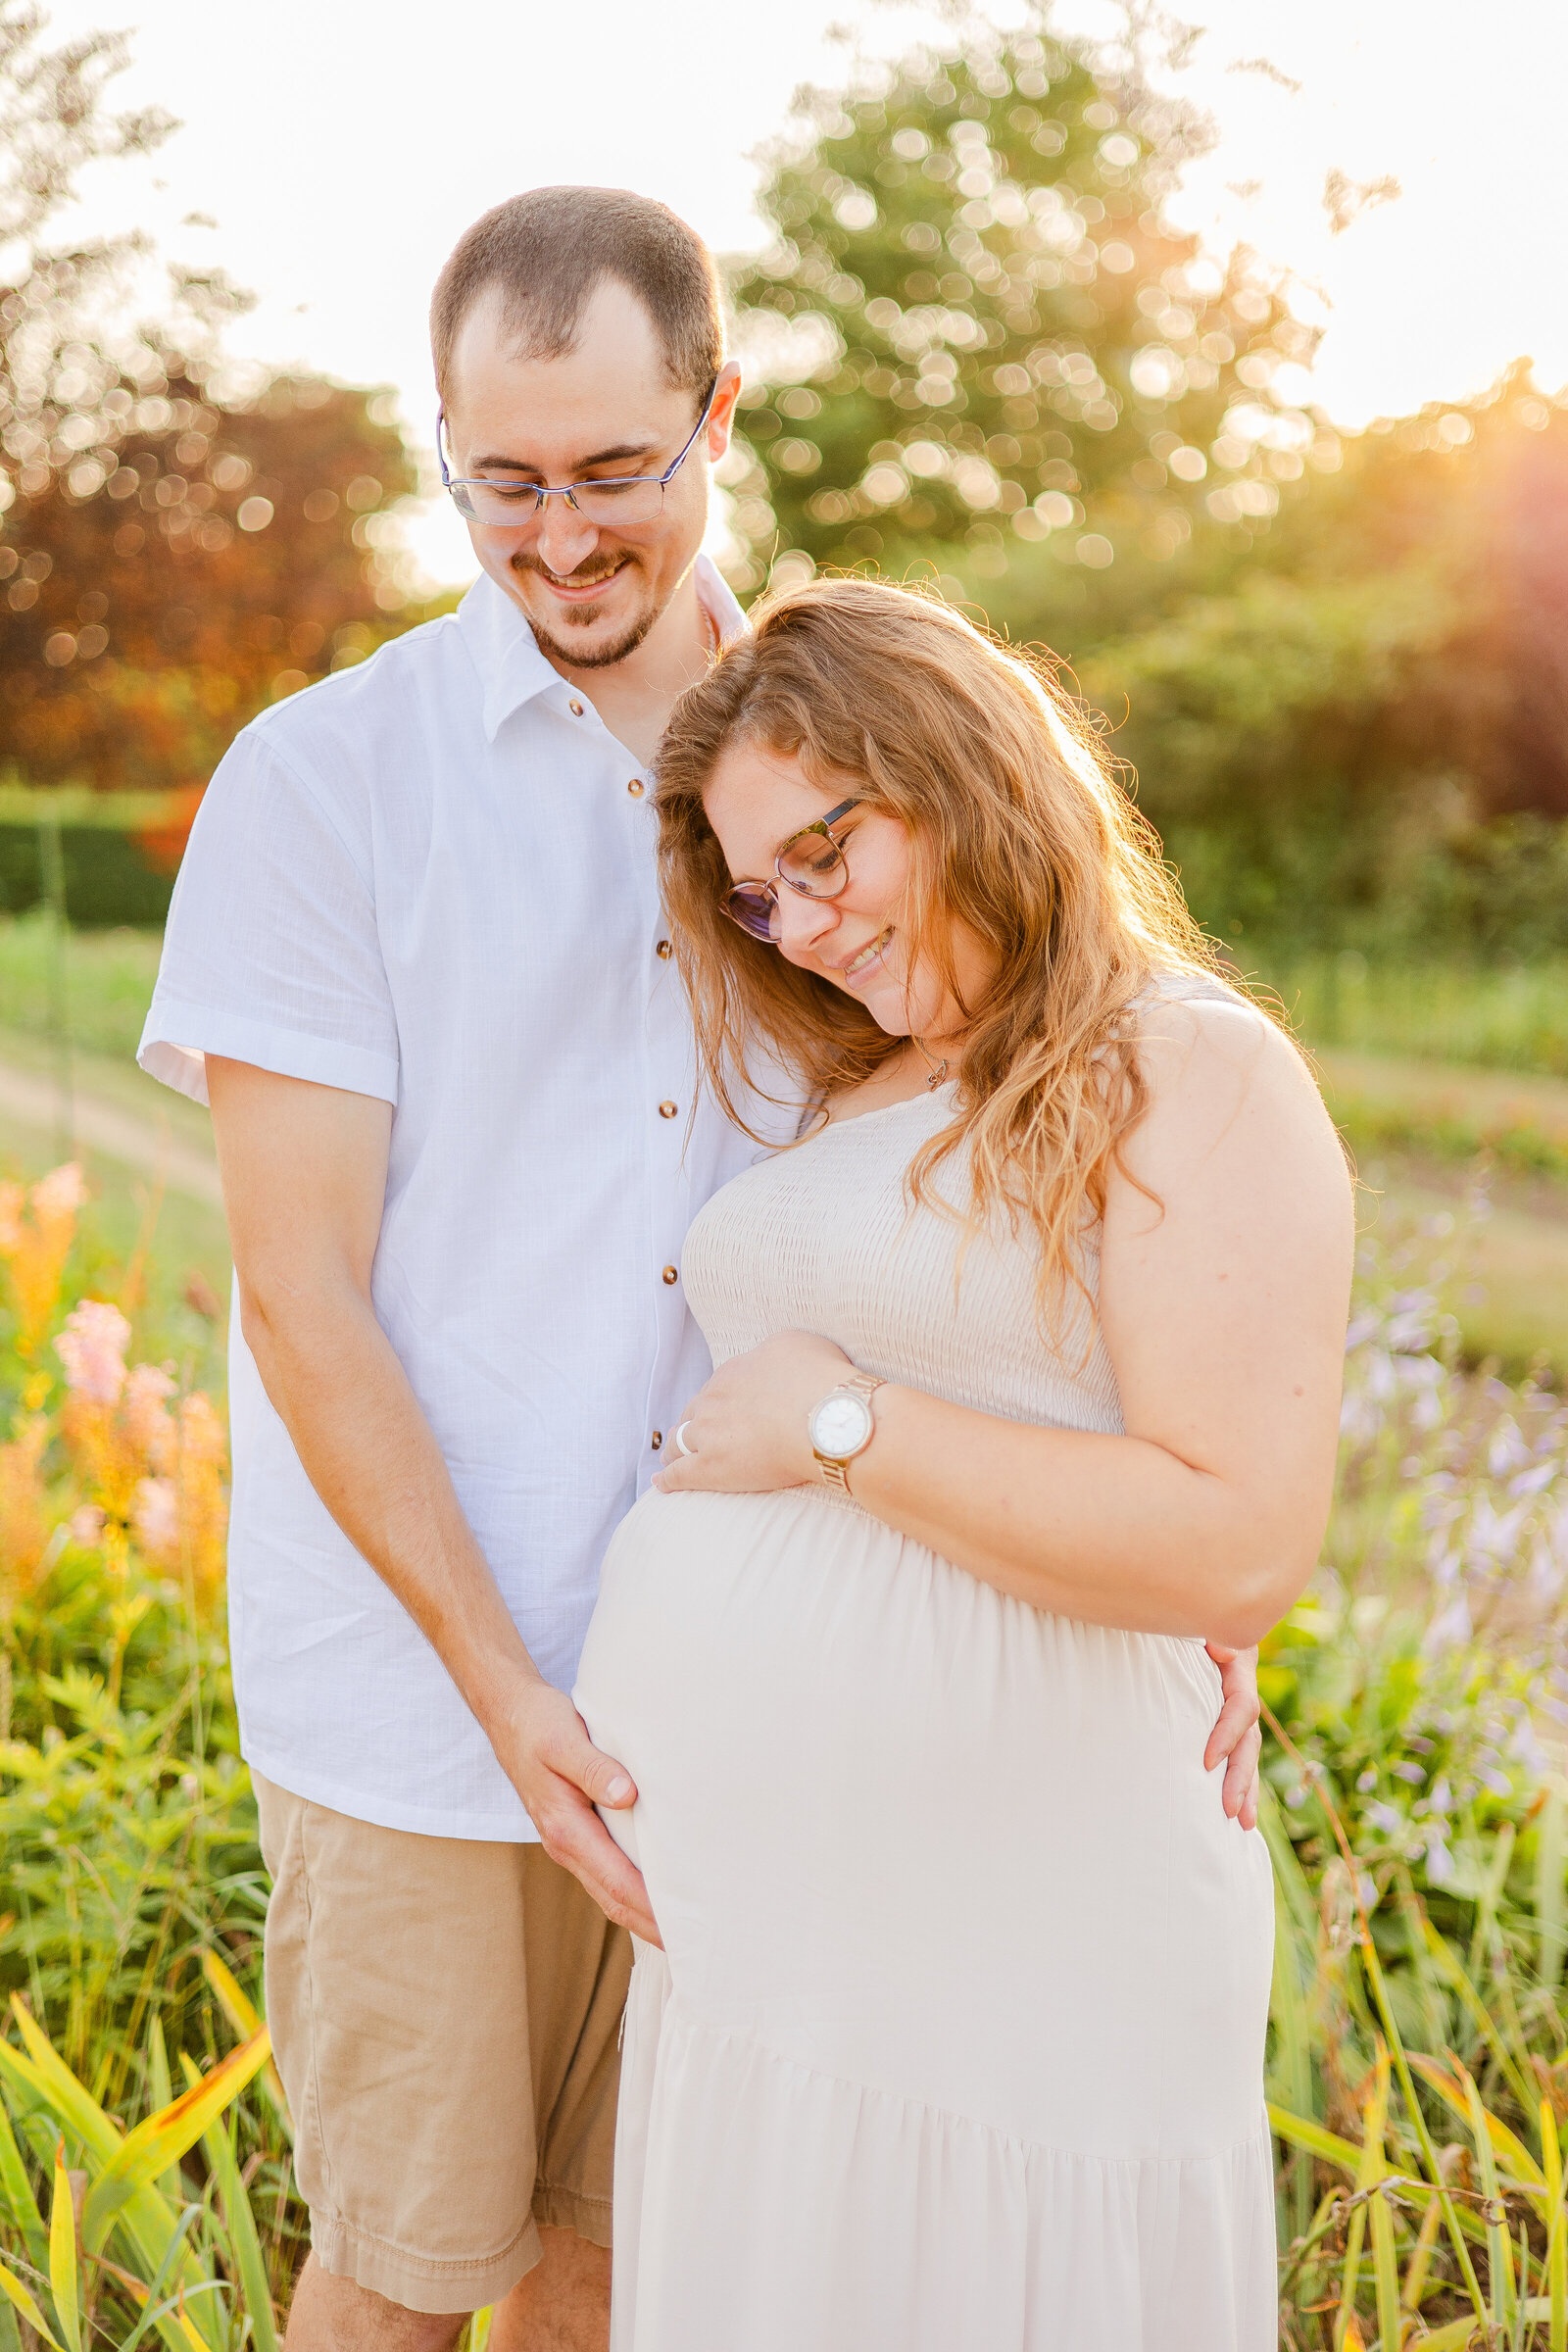 20230711_Chelsea Lavallee Photography_Harkness State Park_Waterford CT_Maternity-103